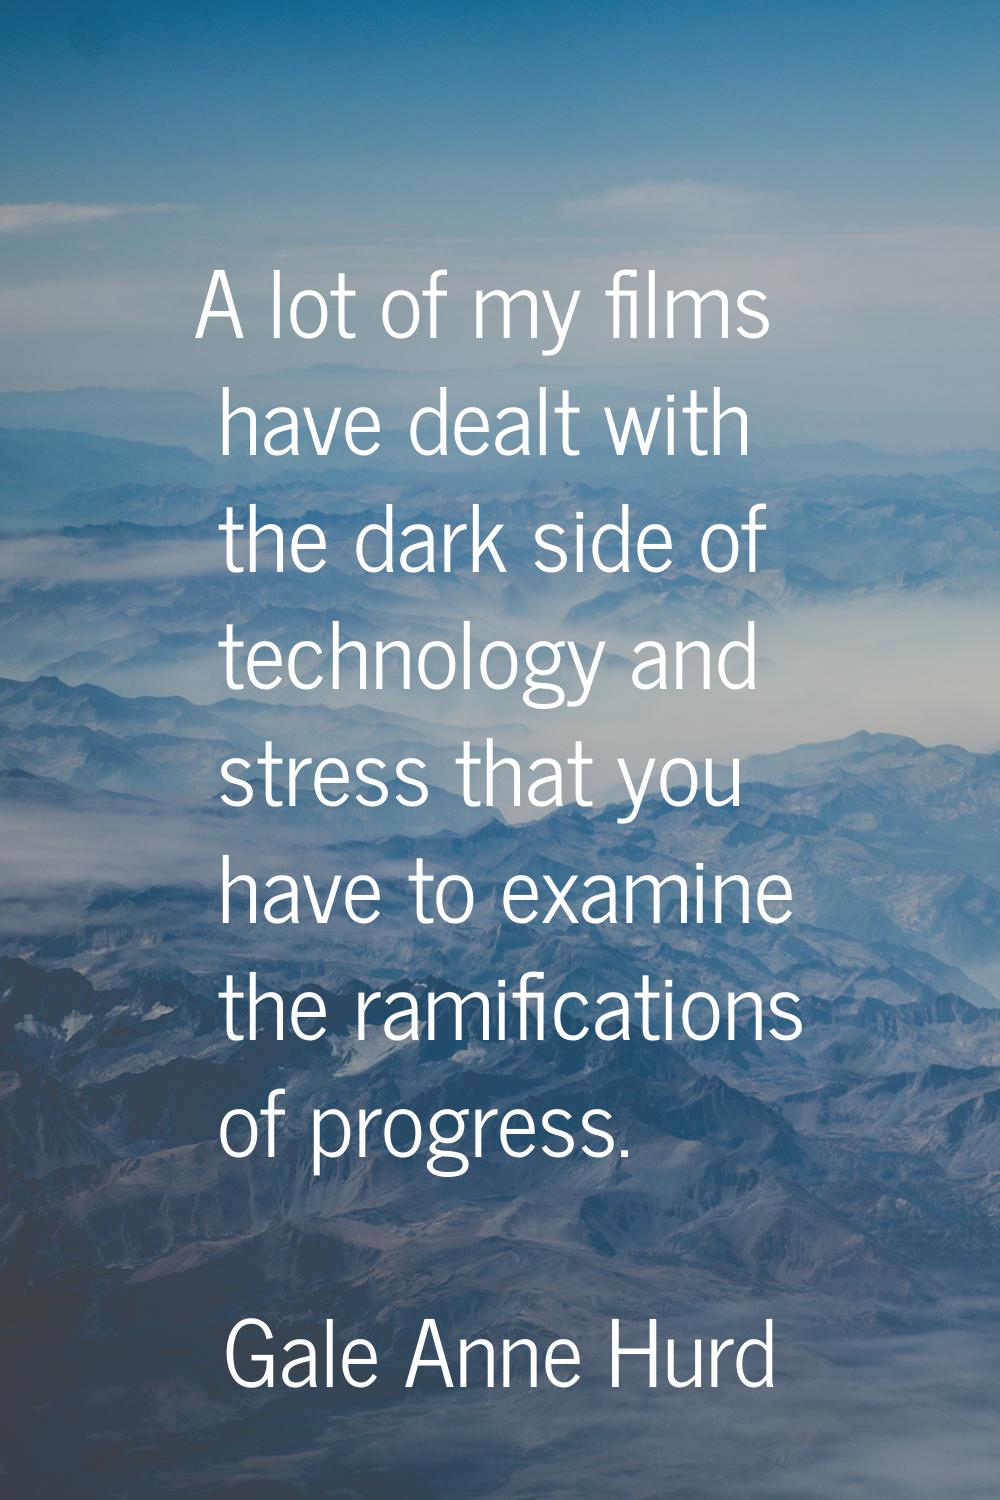 A lot of my films have dealt with the dark side of technology and stress that you have to examine t